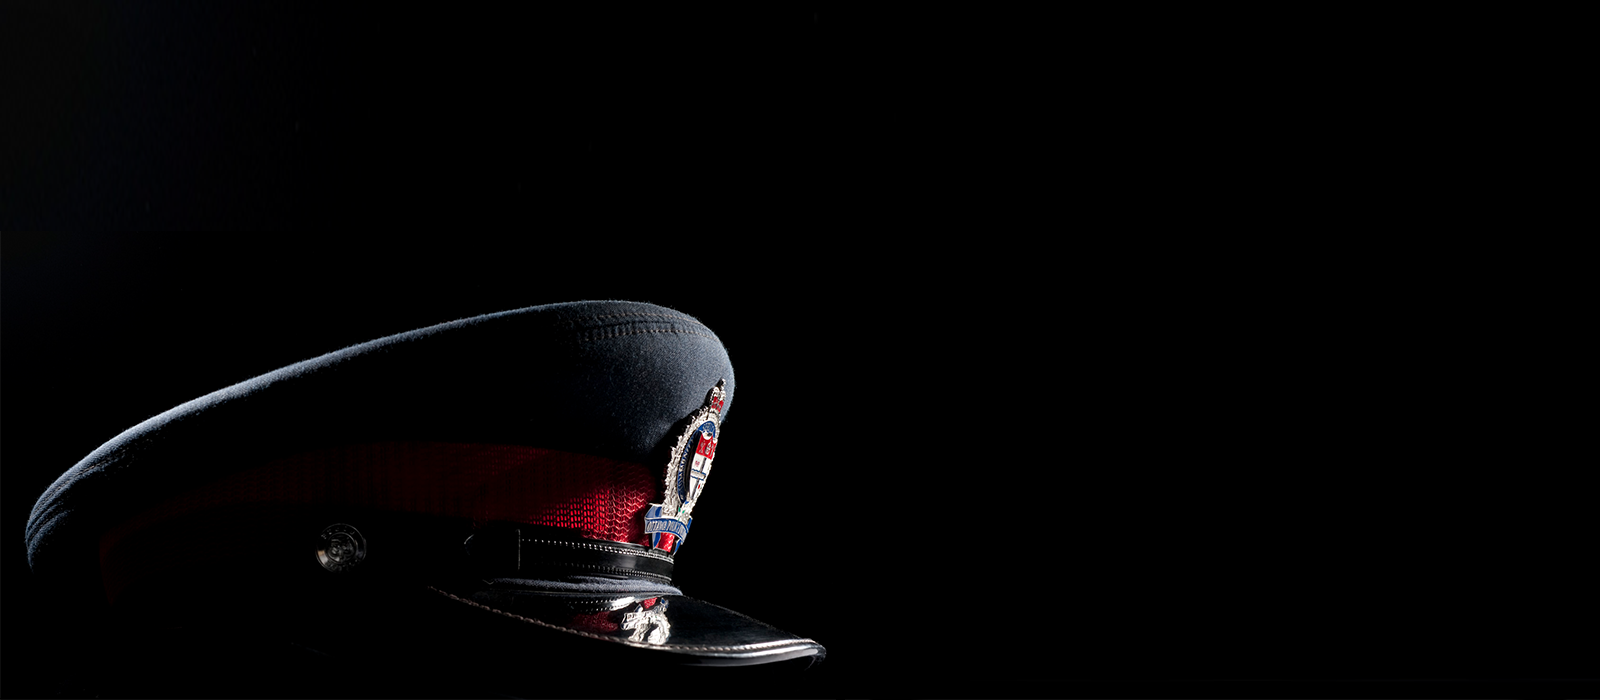 An image of an Ottawa Police Service member's forage hat